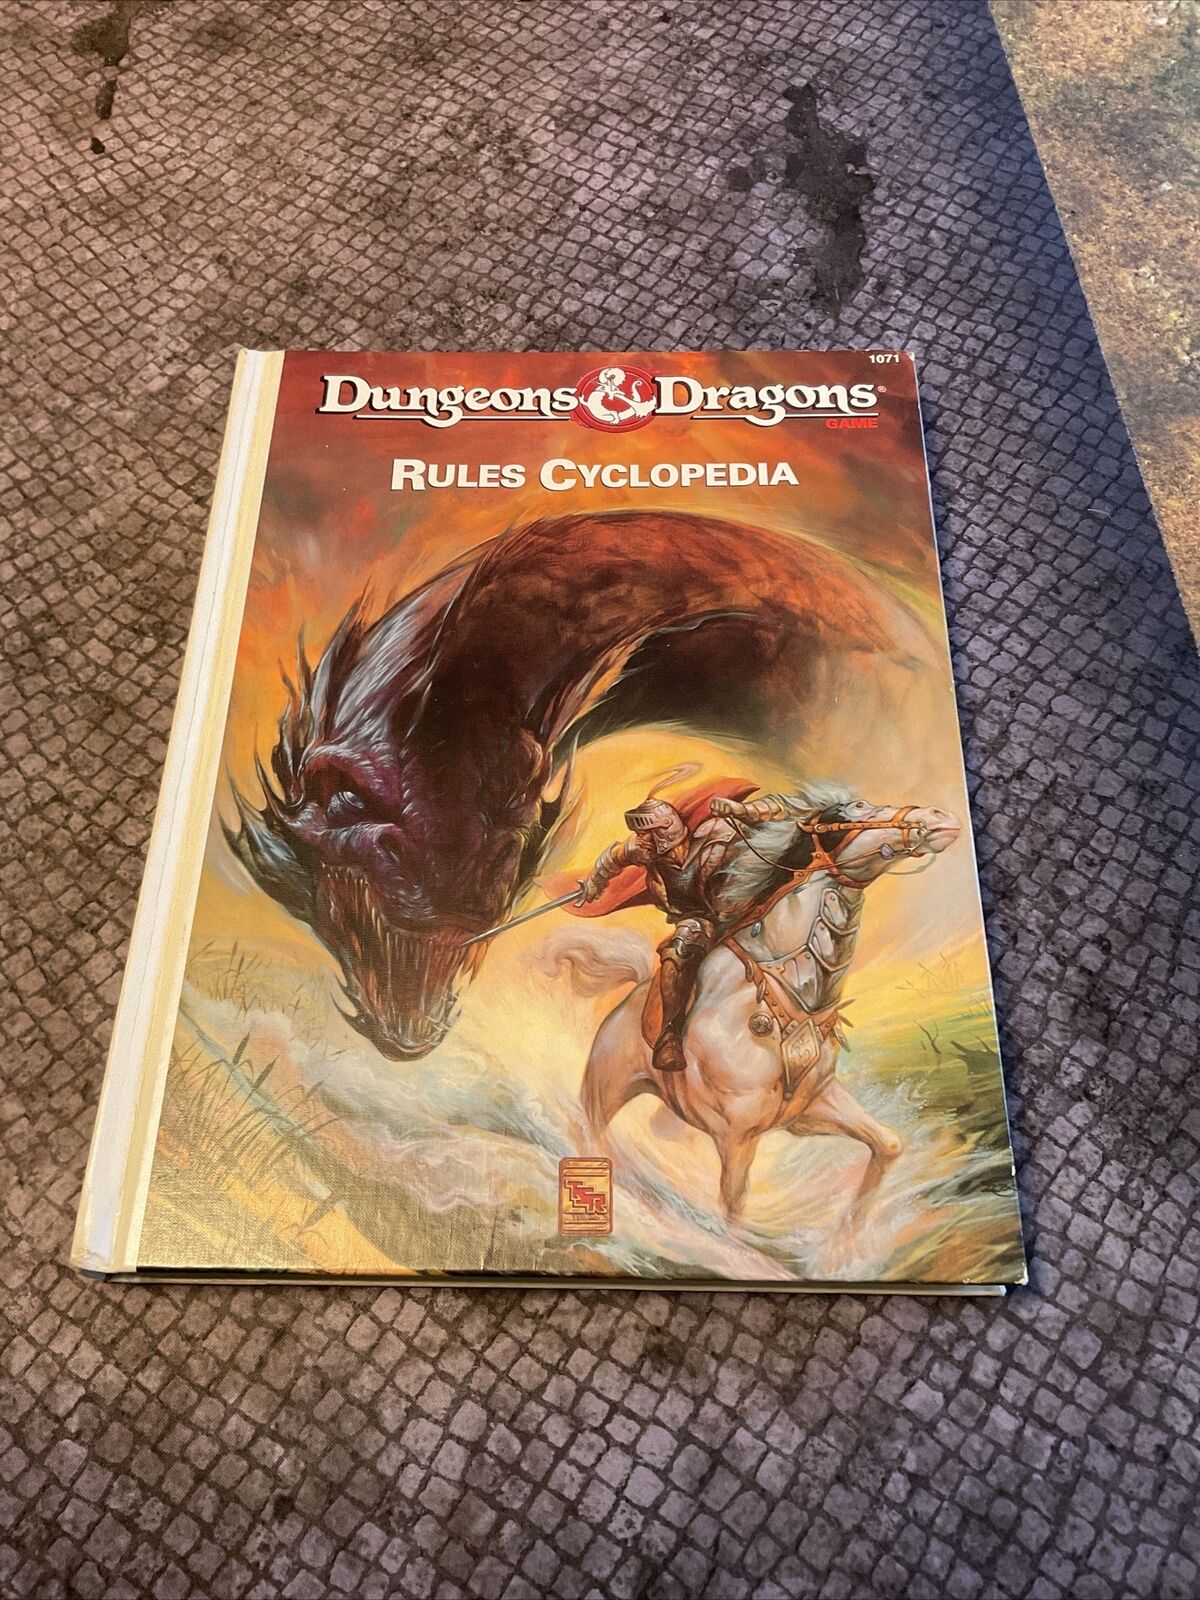 Dungeon And Dragons Rules Cyclopedia Hardcover